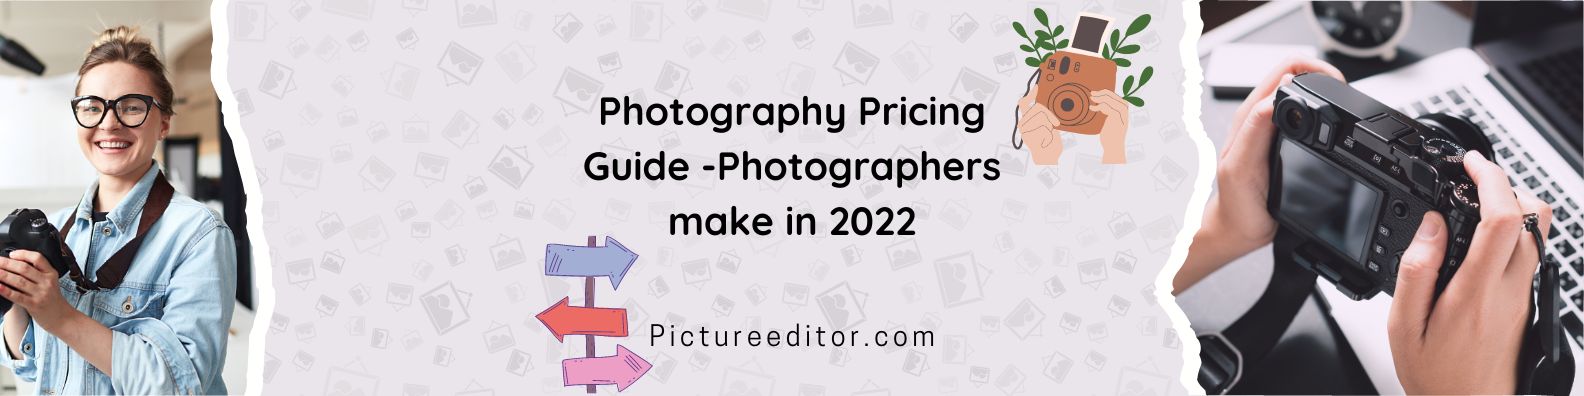 Photography Pricing Guide -Photographers make in 2022